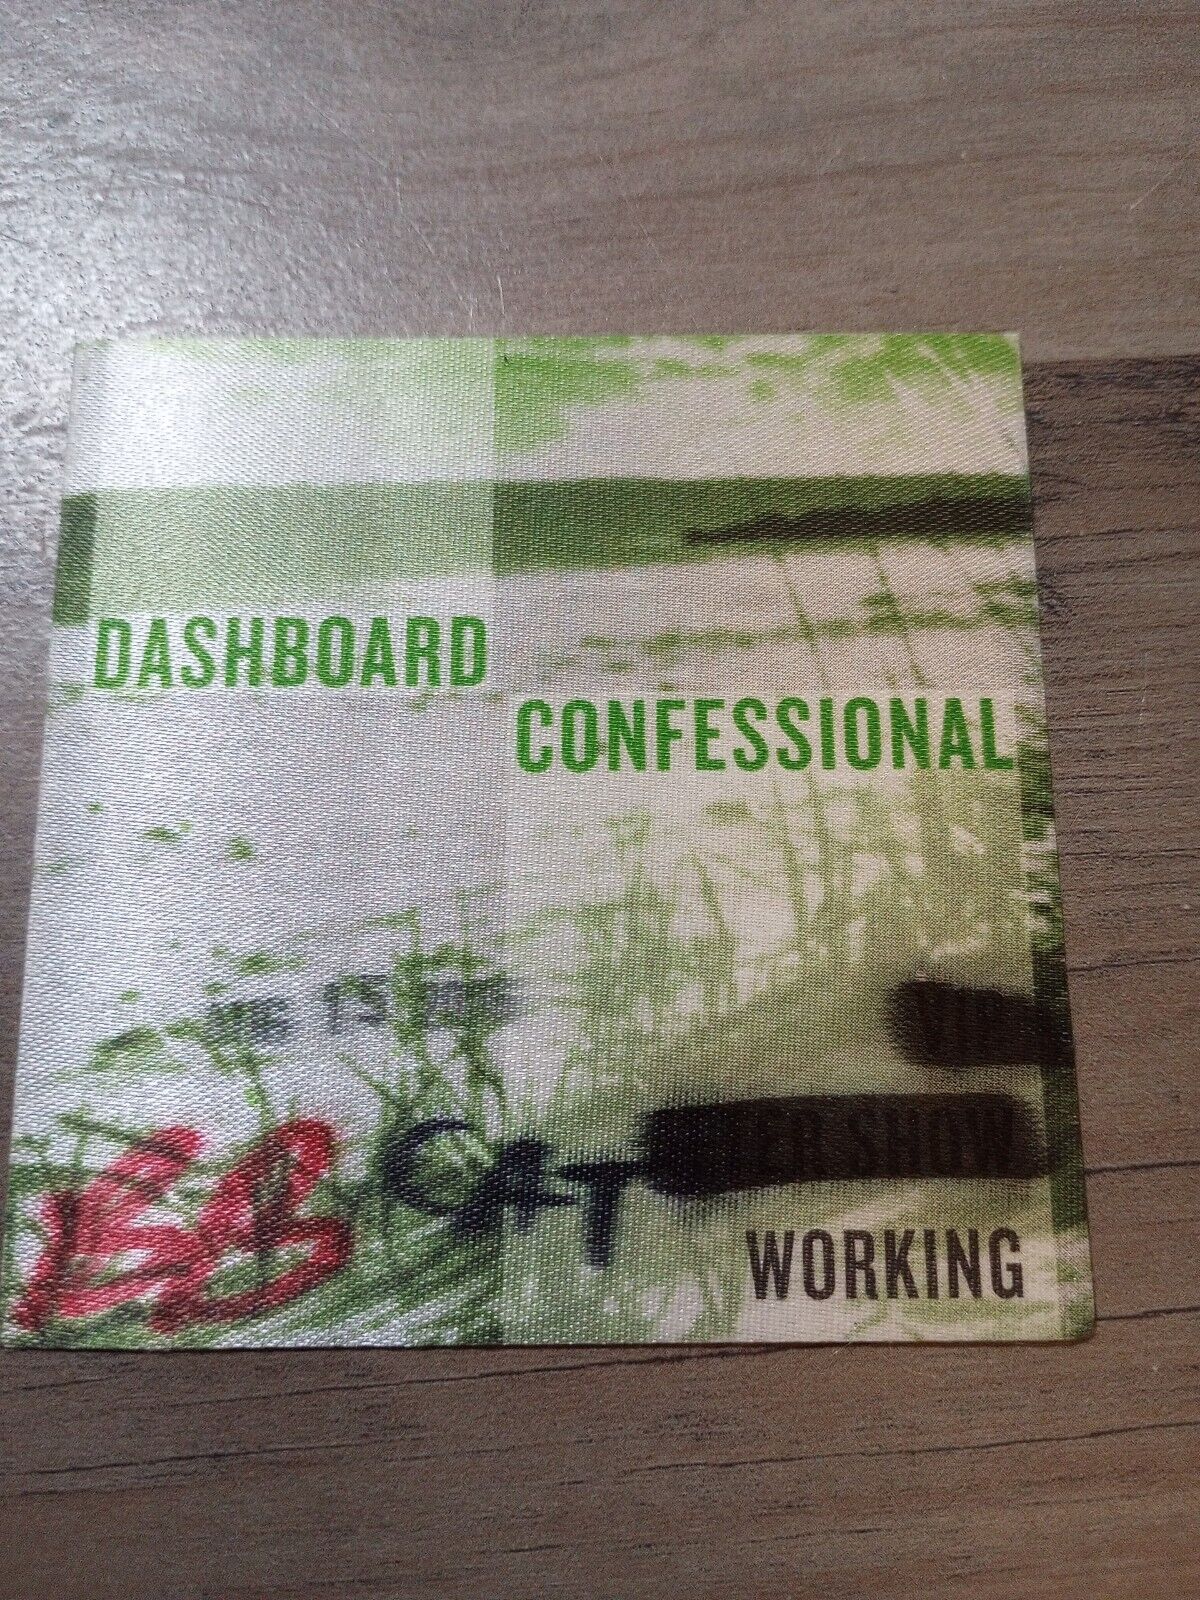 Dashboard Confessional 2006 Tour Backstage Pass Concert